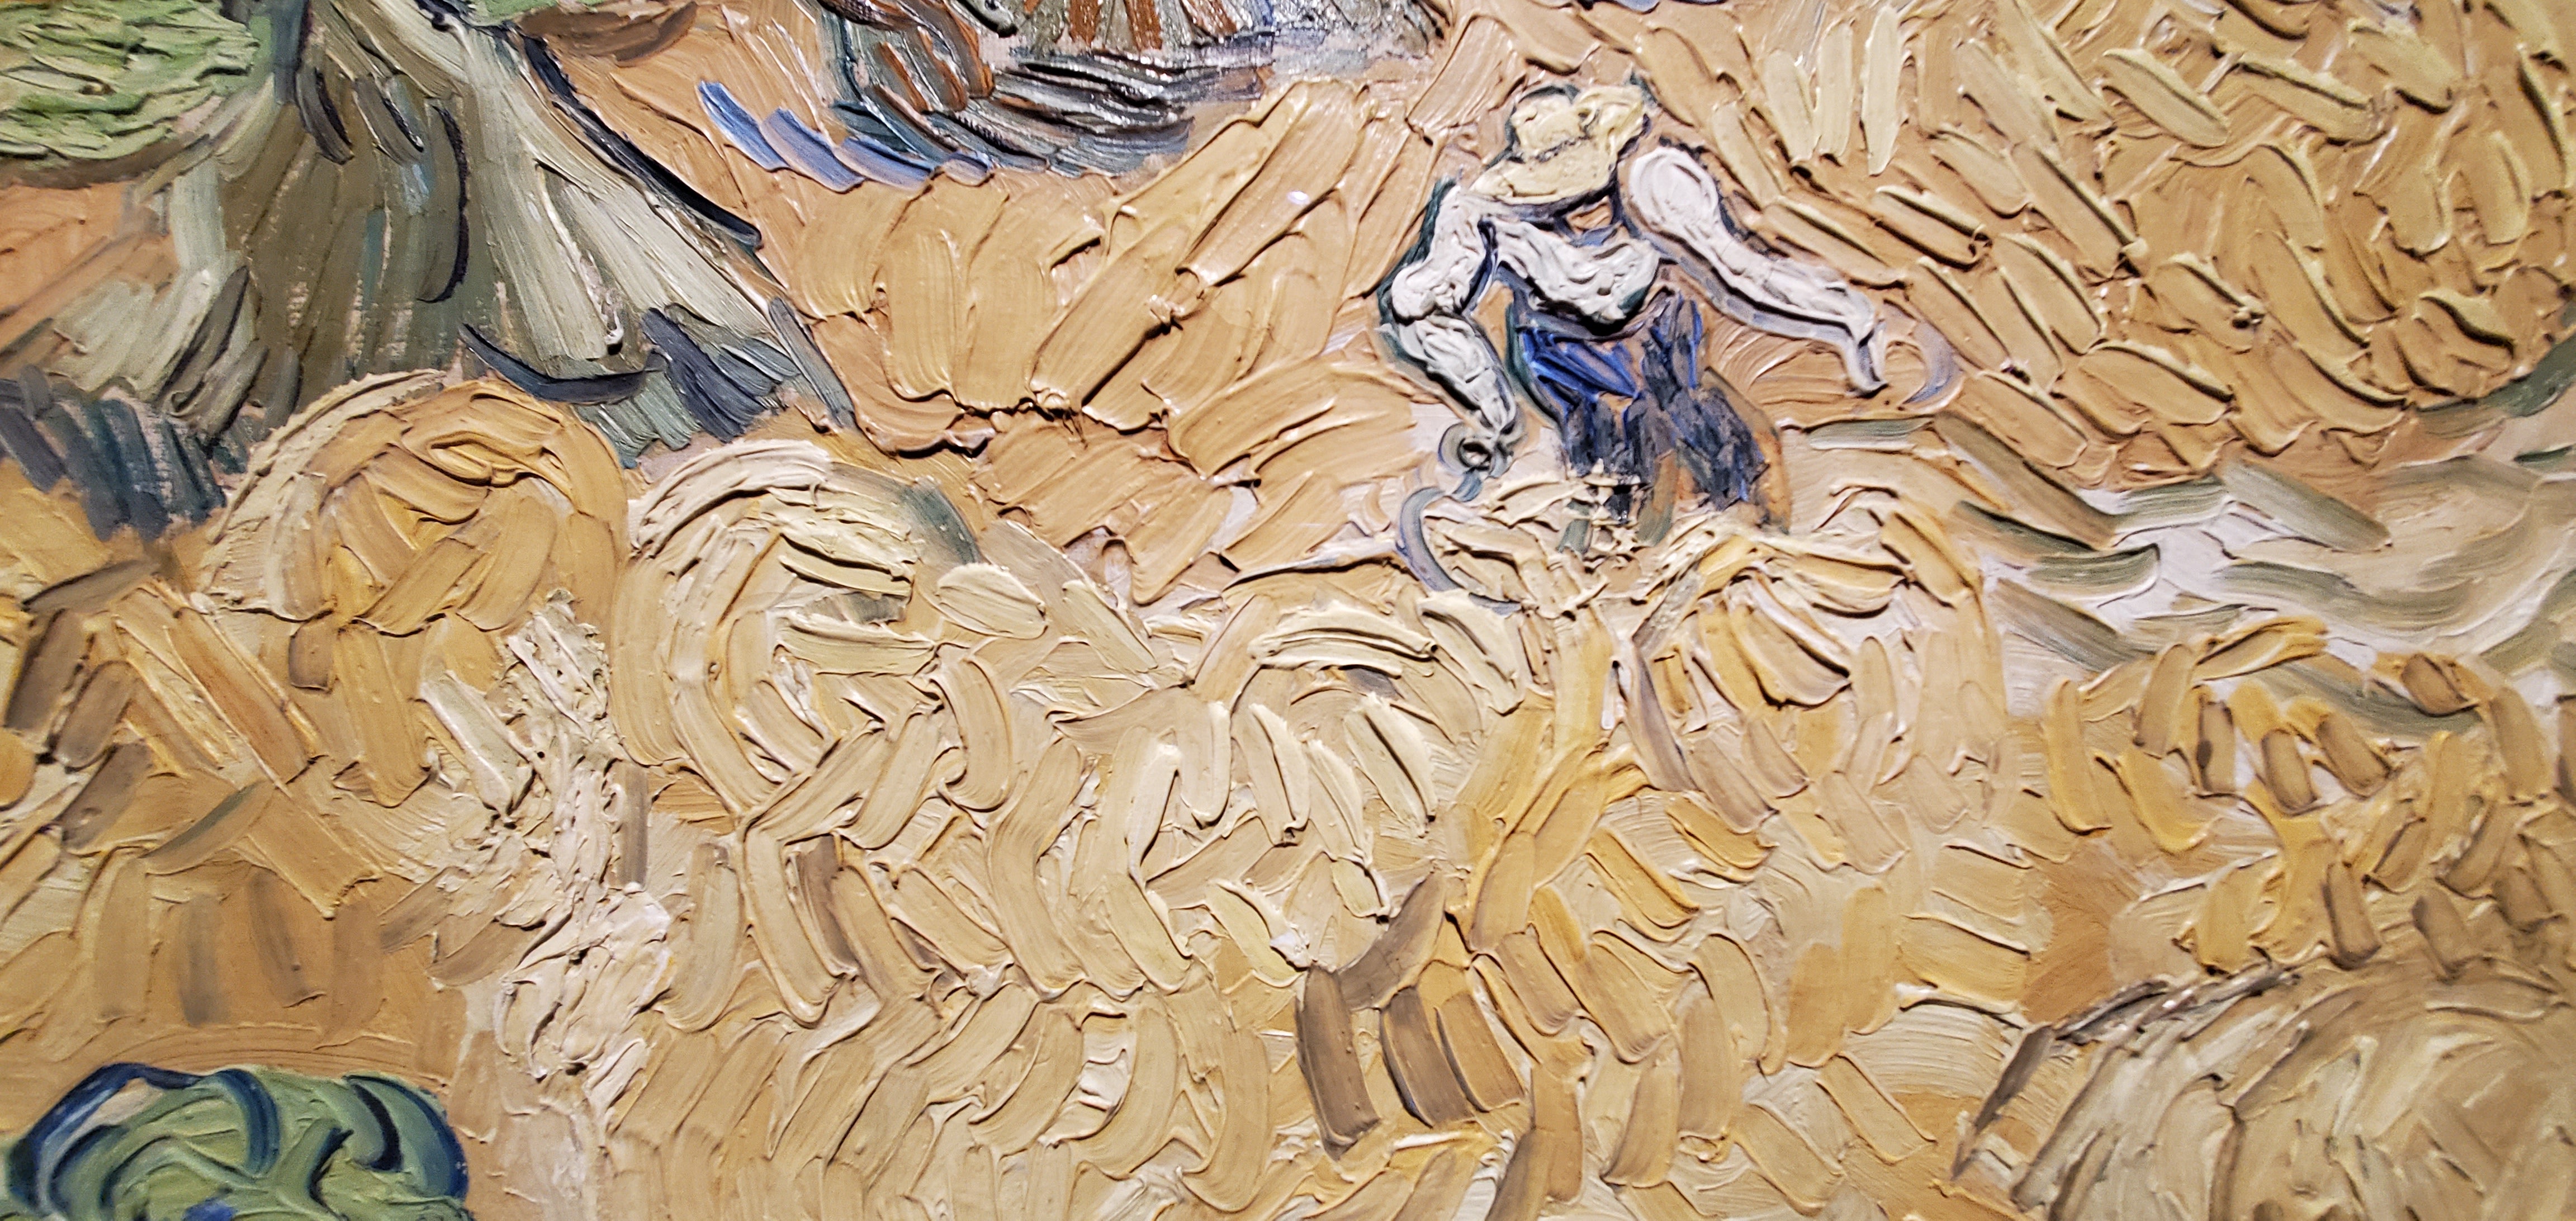 Detail of "Wheat Fields with Reaper," taken by Marsha Battle Philpot at the Detroit Institute of Arts' Van Gogh In America exhibition.